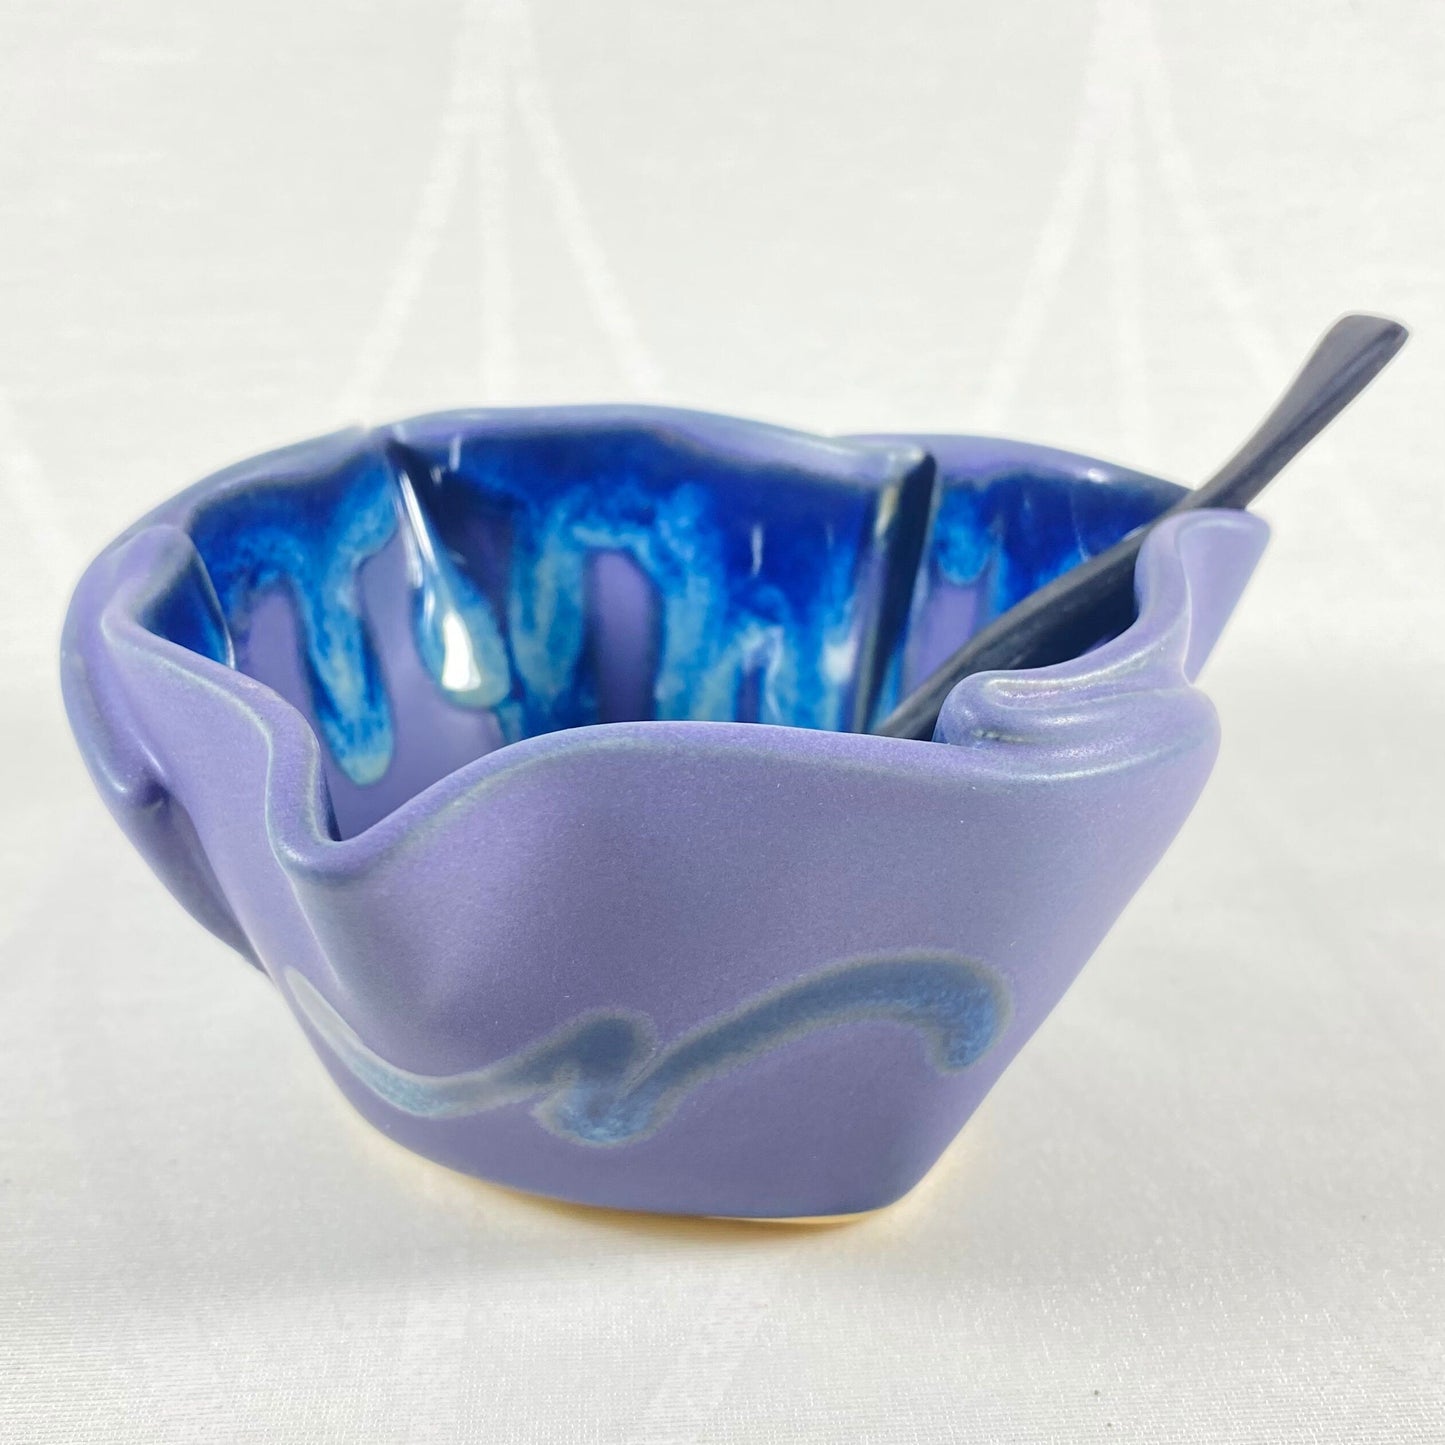 Small Handmade Purple and Blue Multipurpose Dish with Serving Spoon, Functional and Decorative Pottery